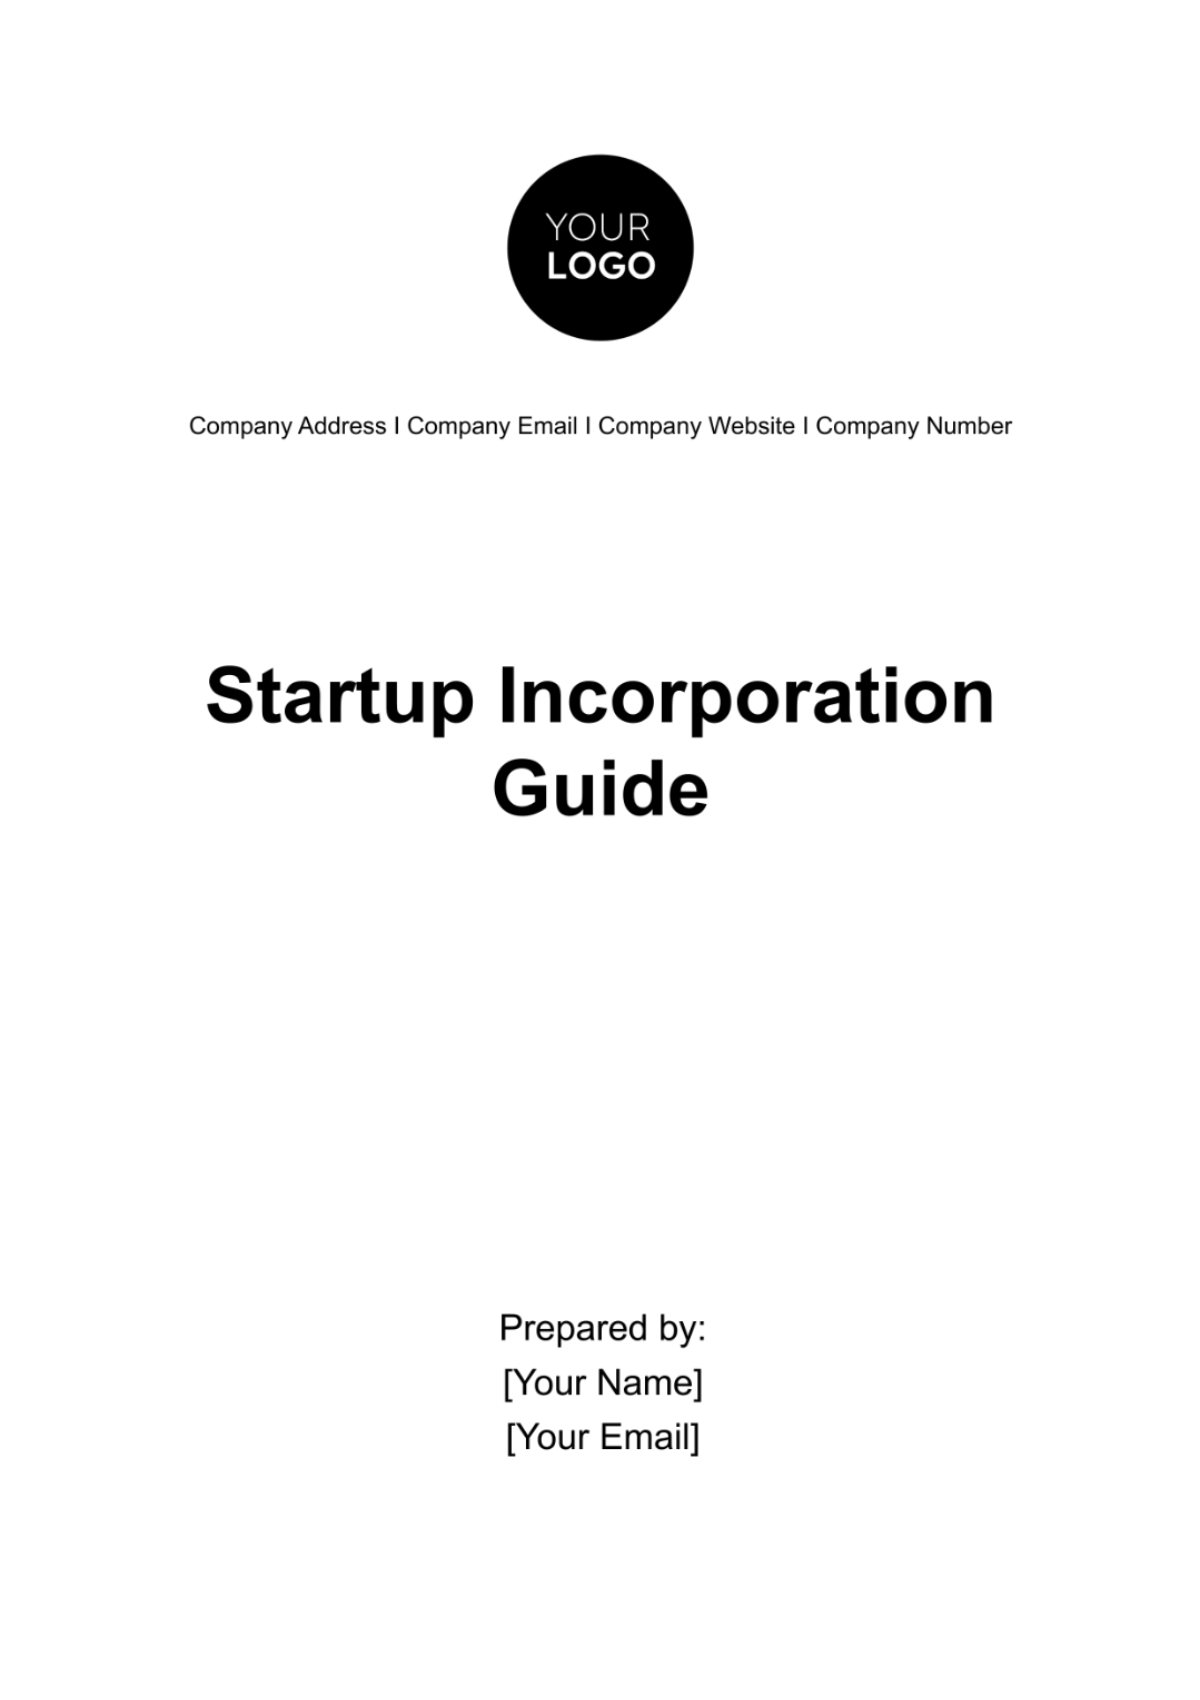 Startup Incorporation Guide Template